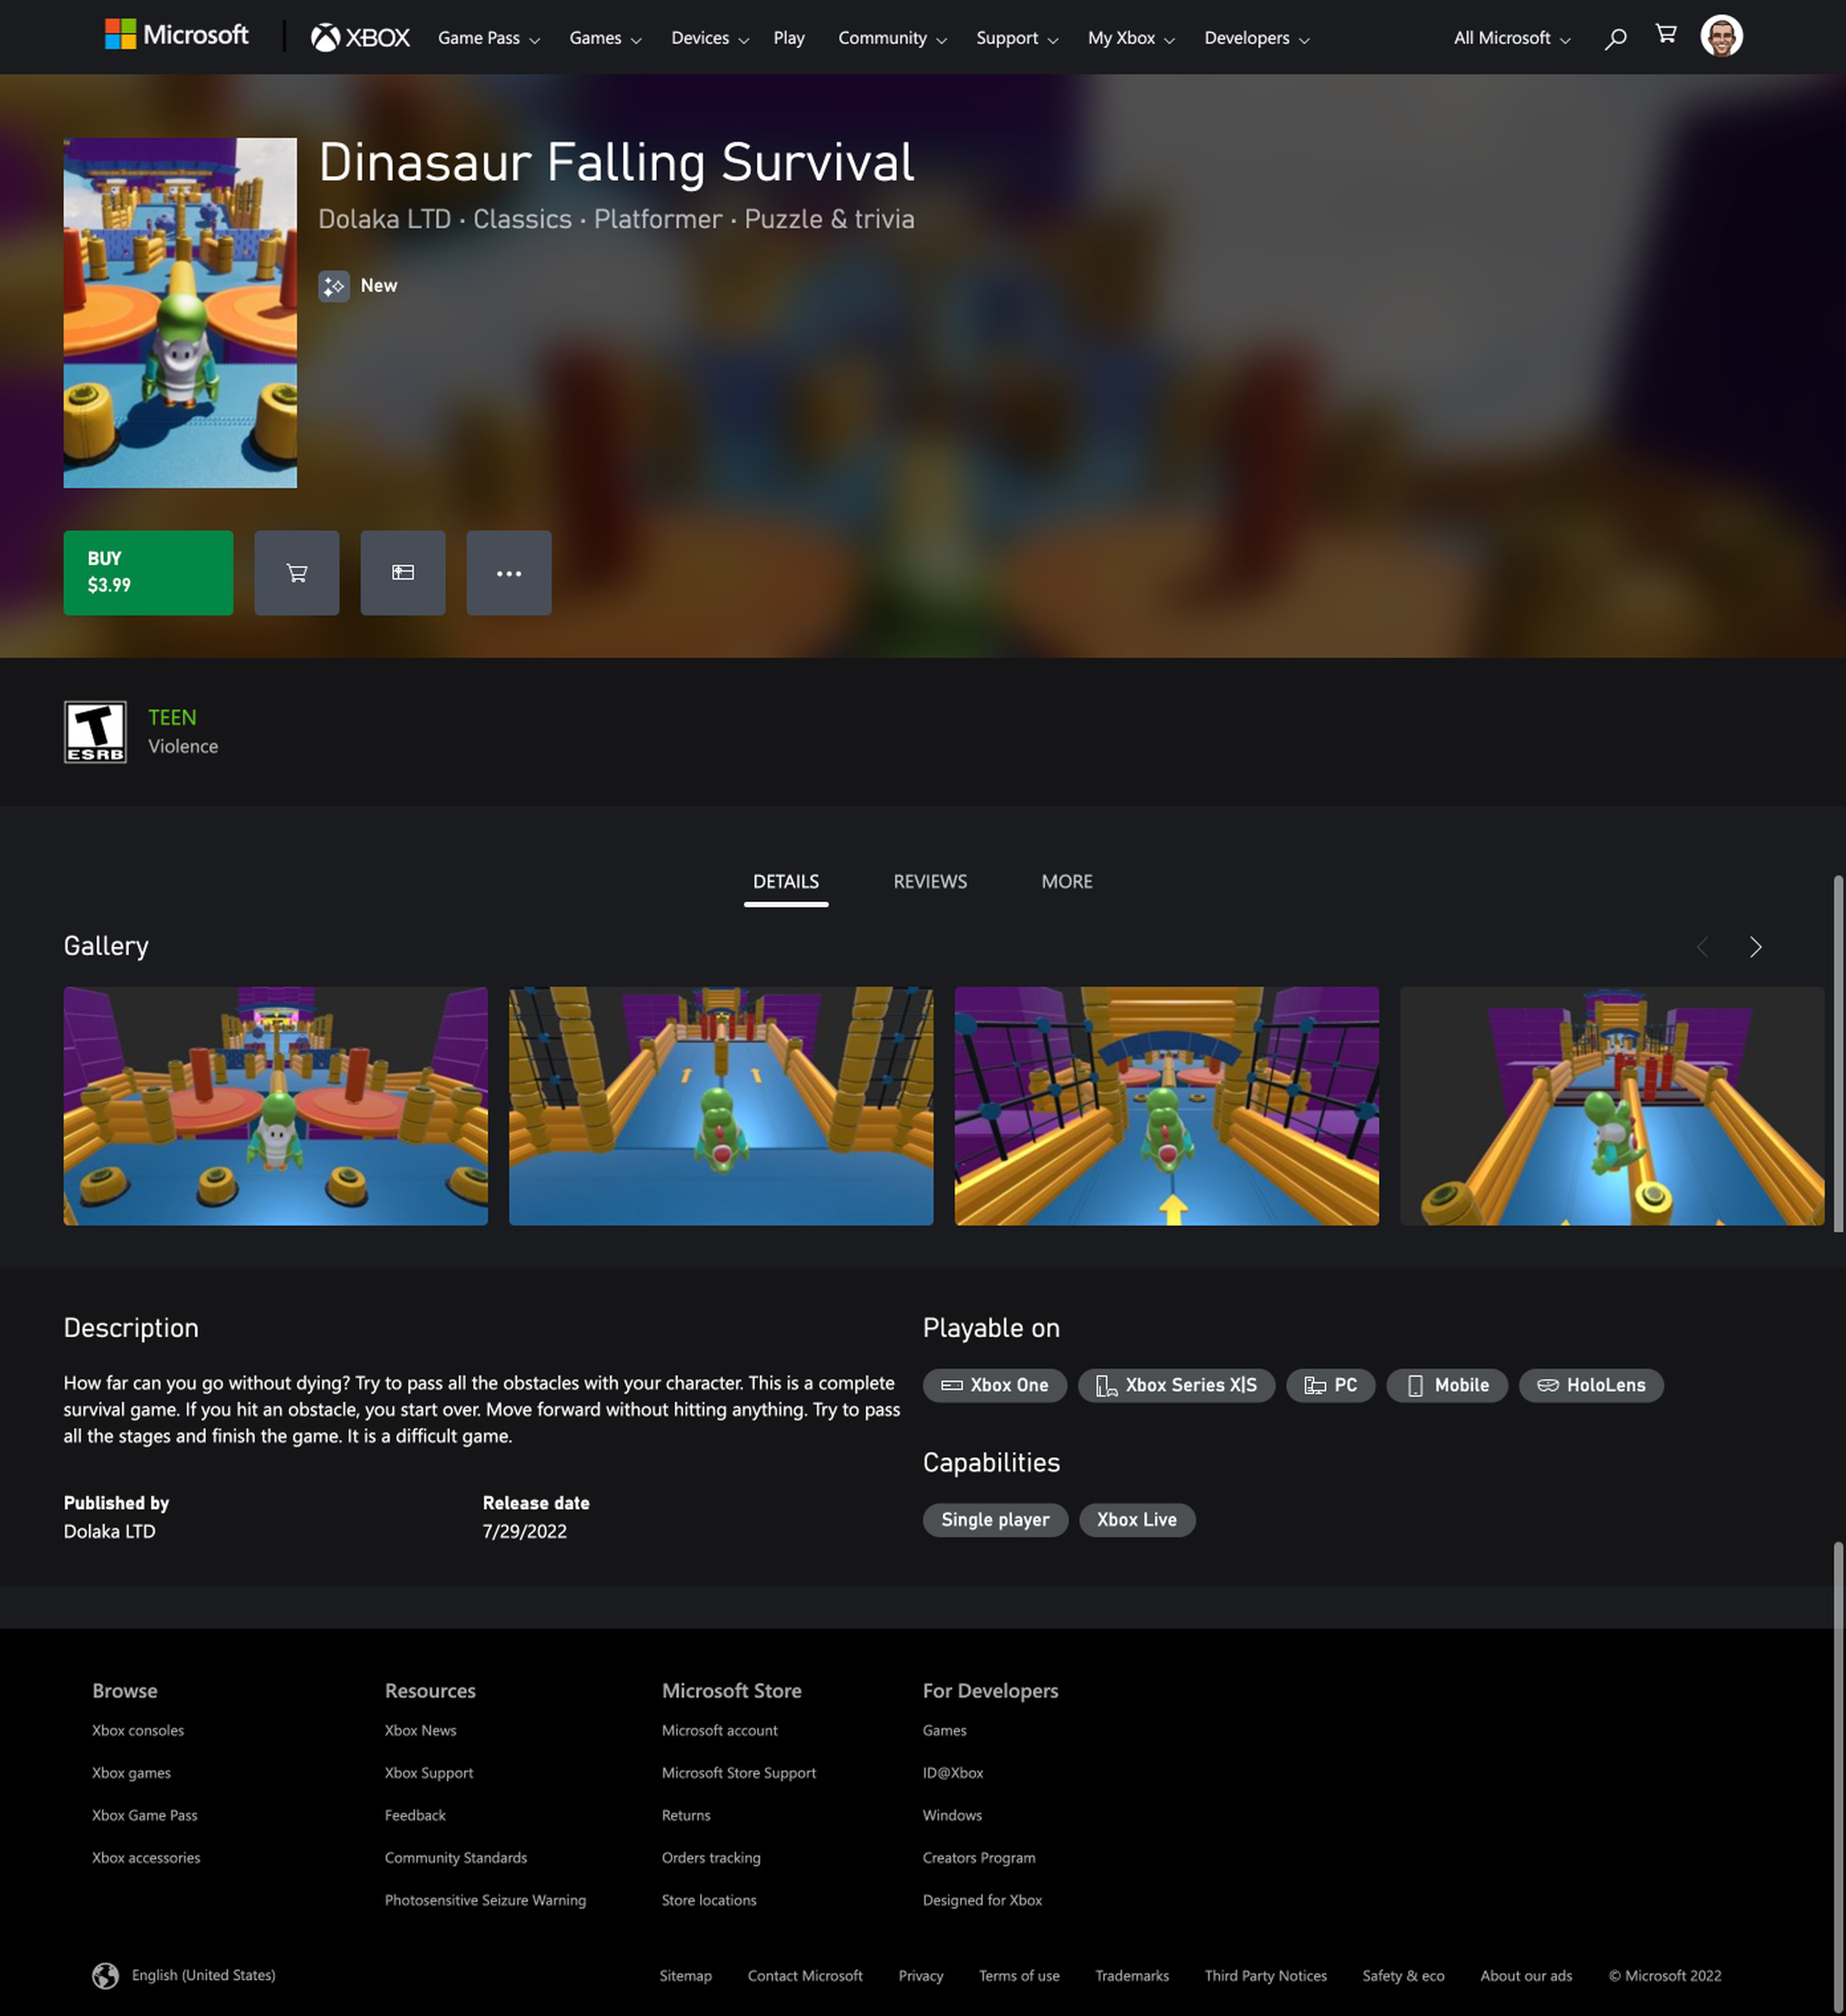 The Xbox Store page for Dinasaur Falling Survival.